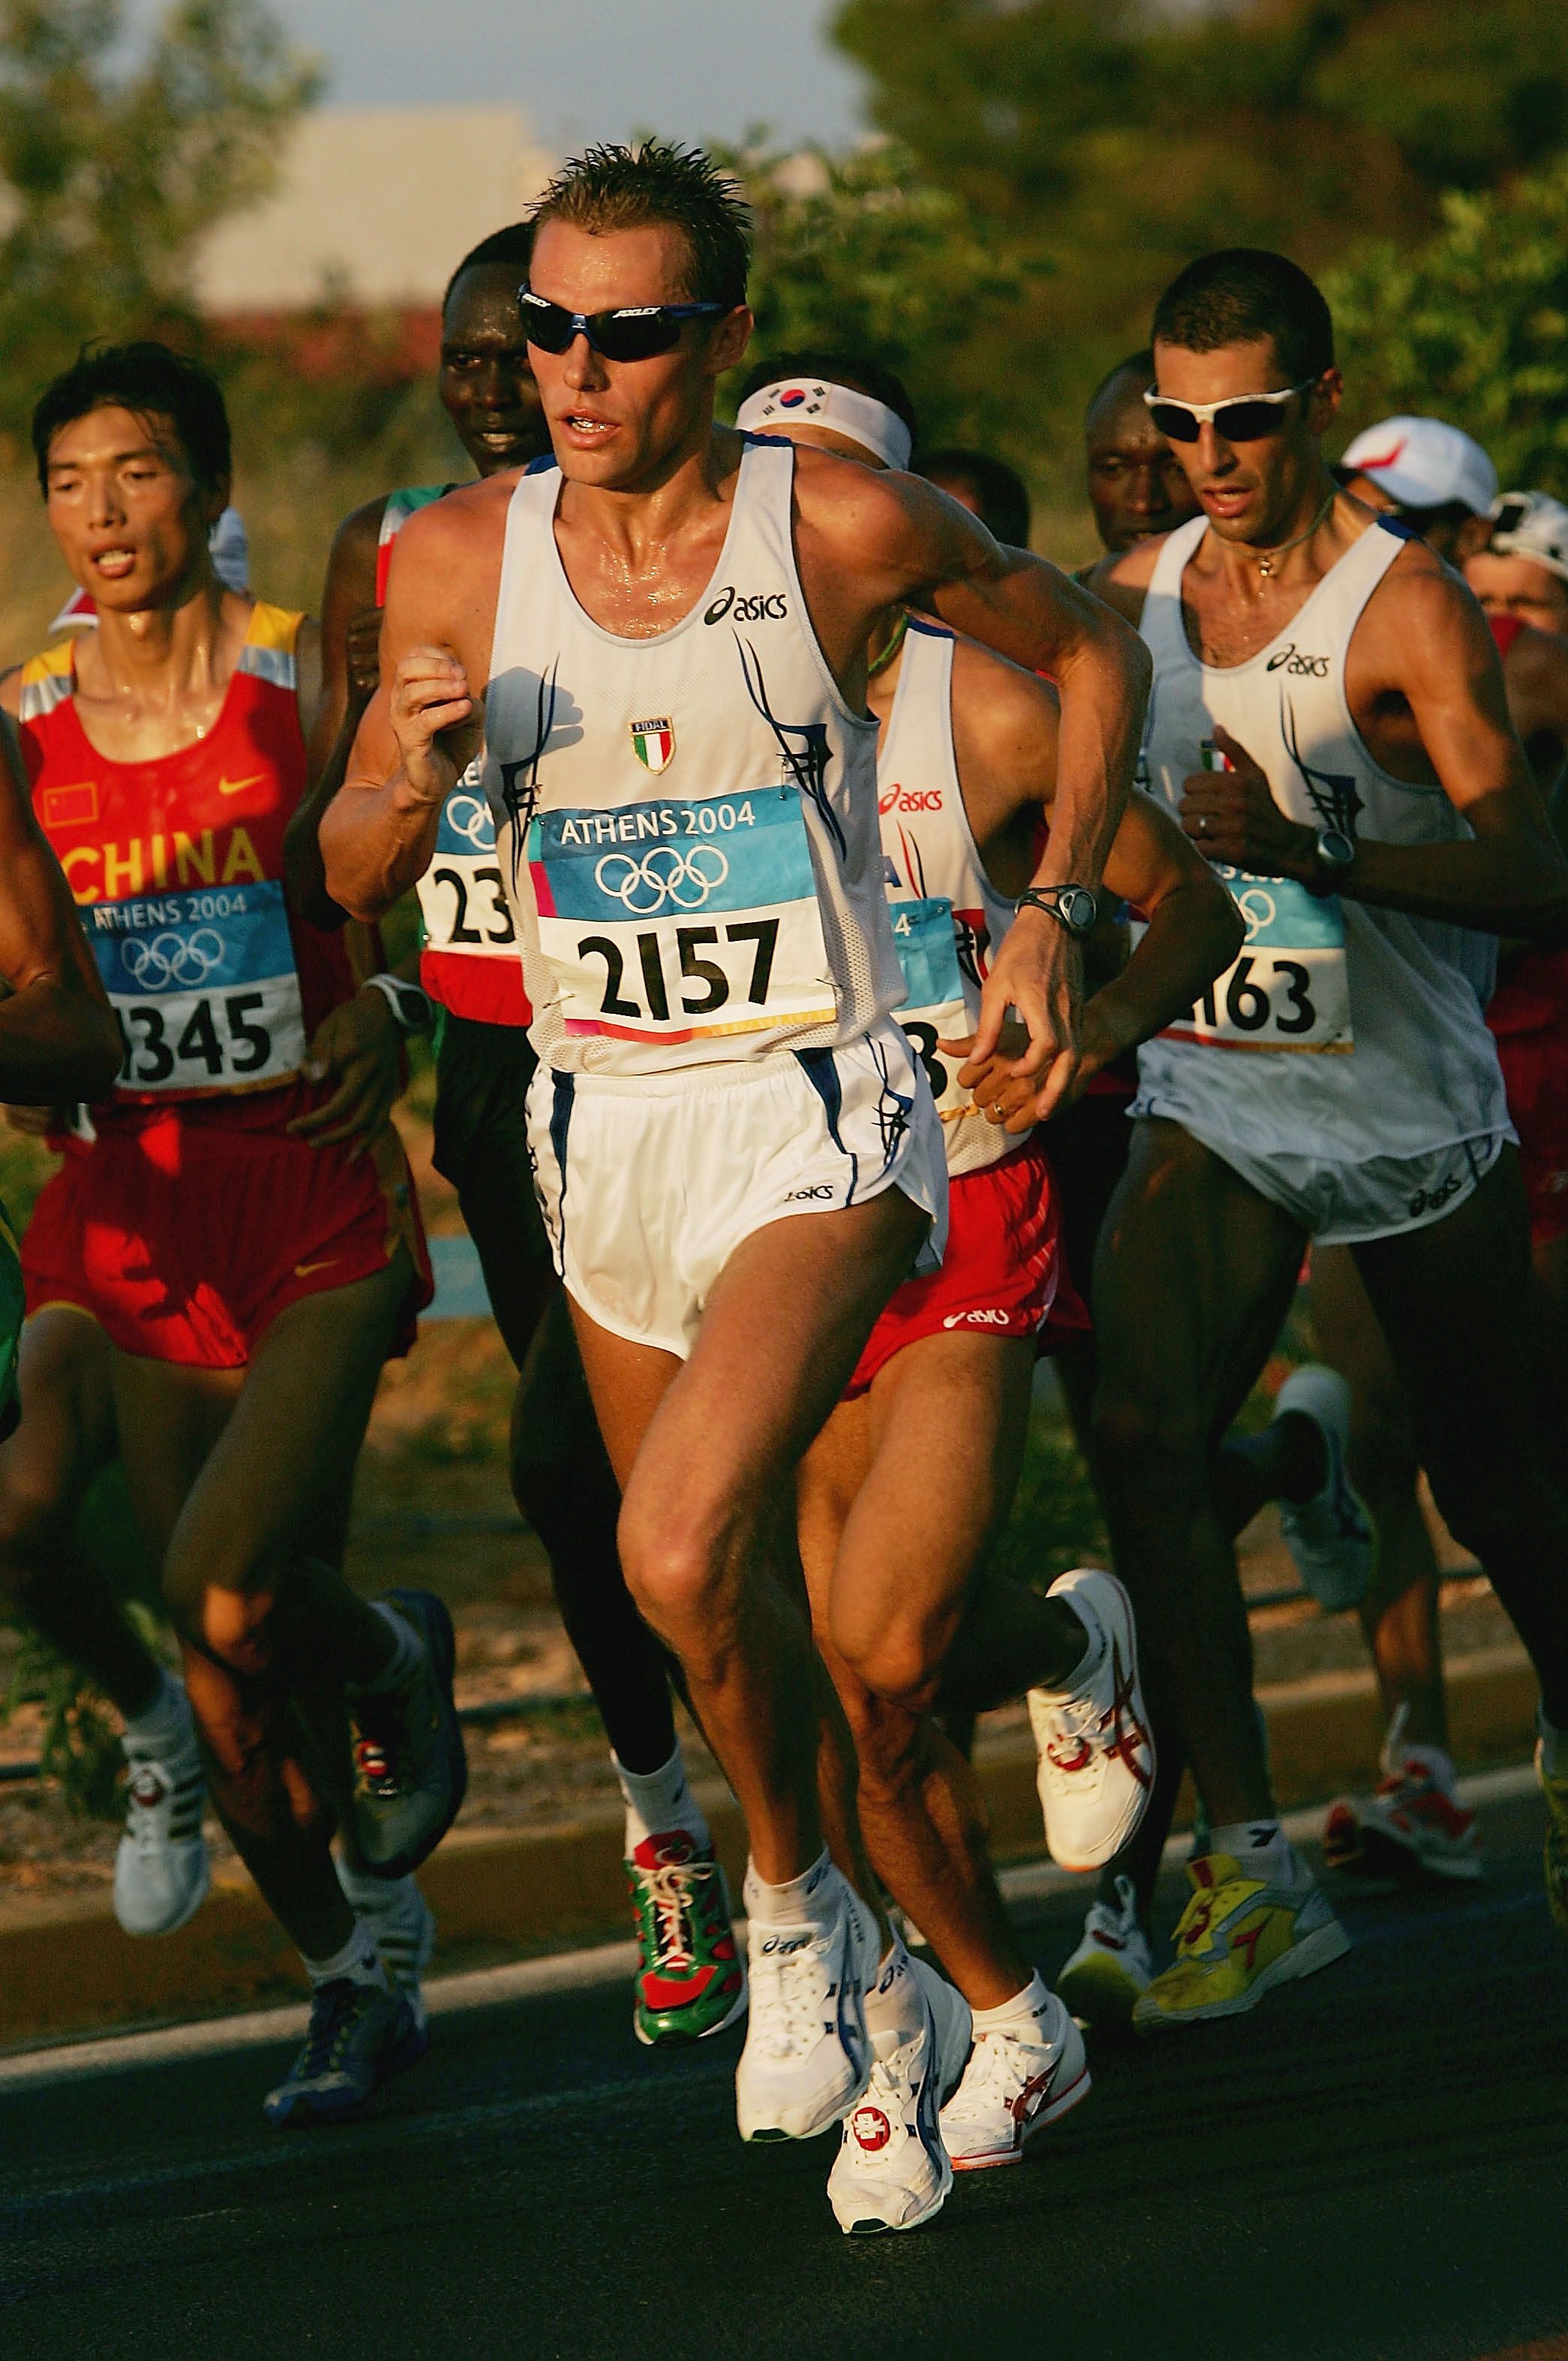 Stefano Baldini in action in the 2004 Olympic marathon title